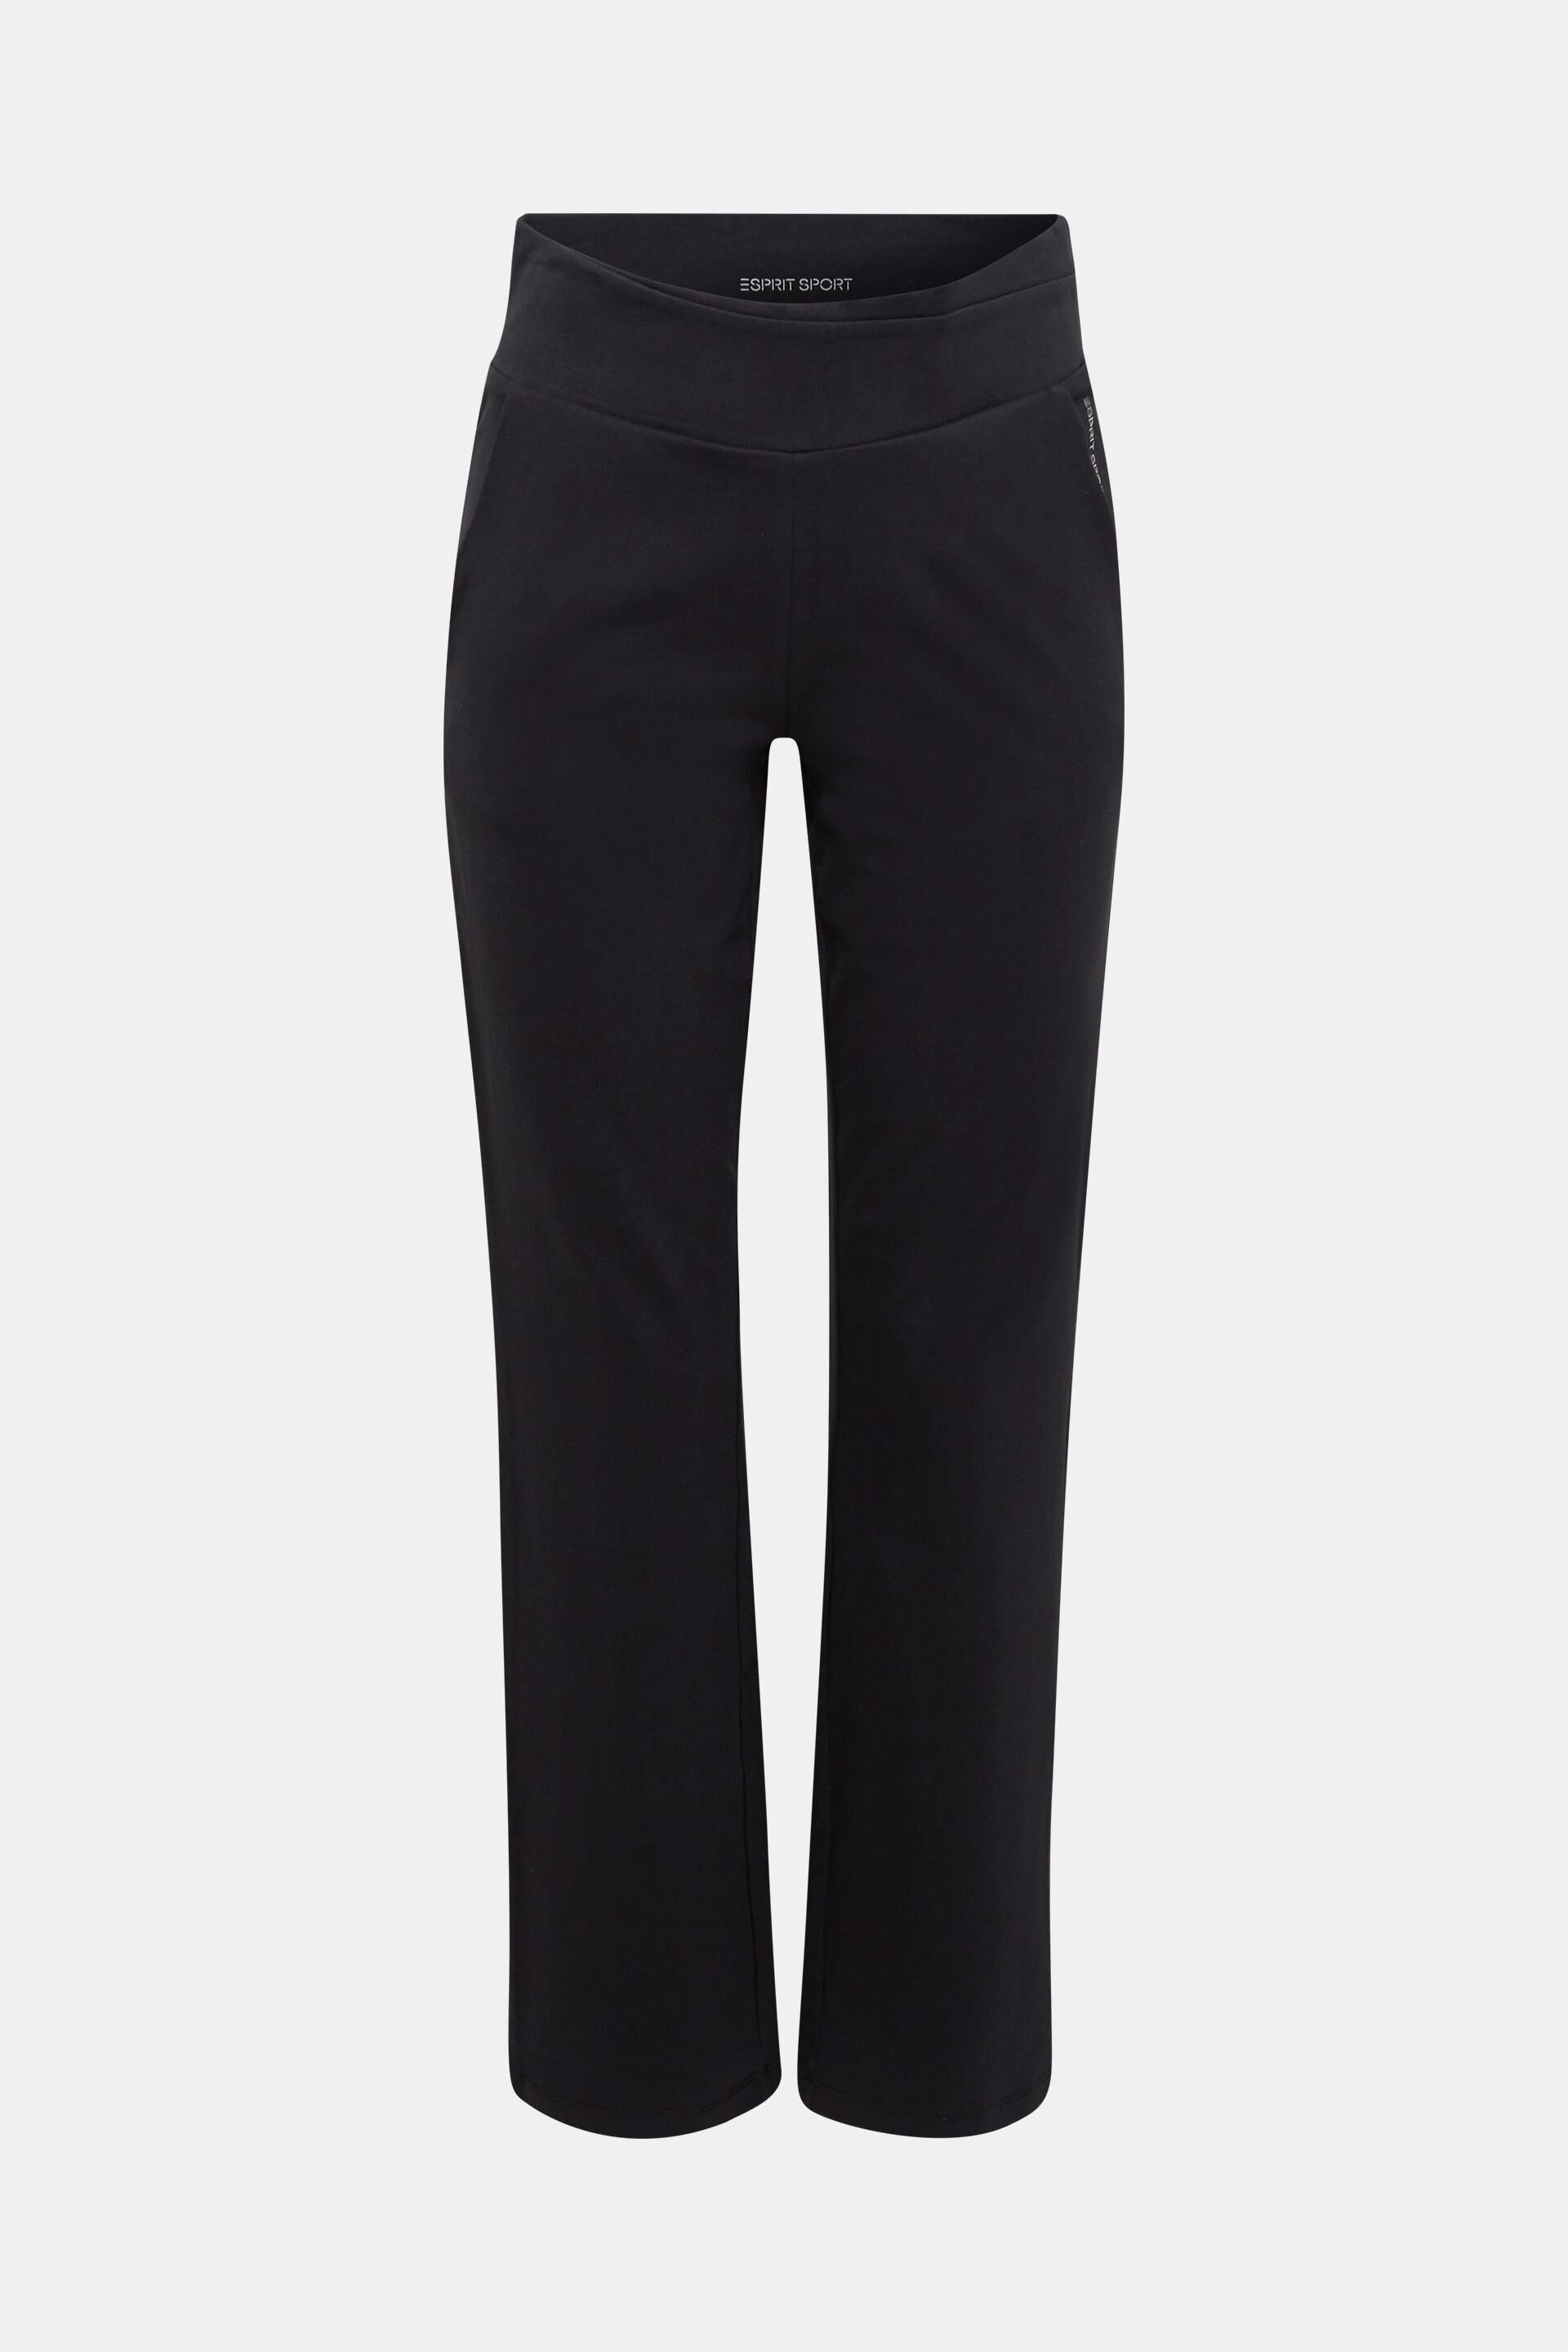 Online Shop Esprit Jersey trousers made organic cotton of